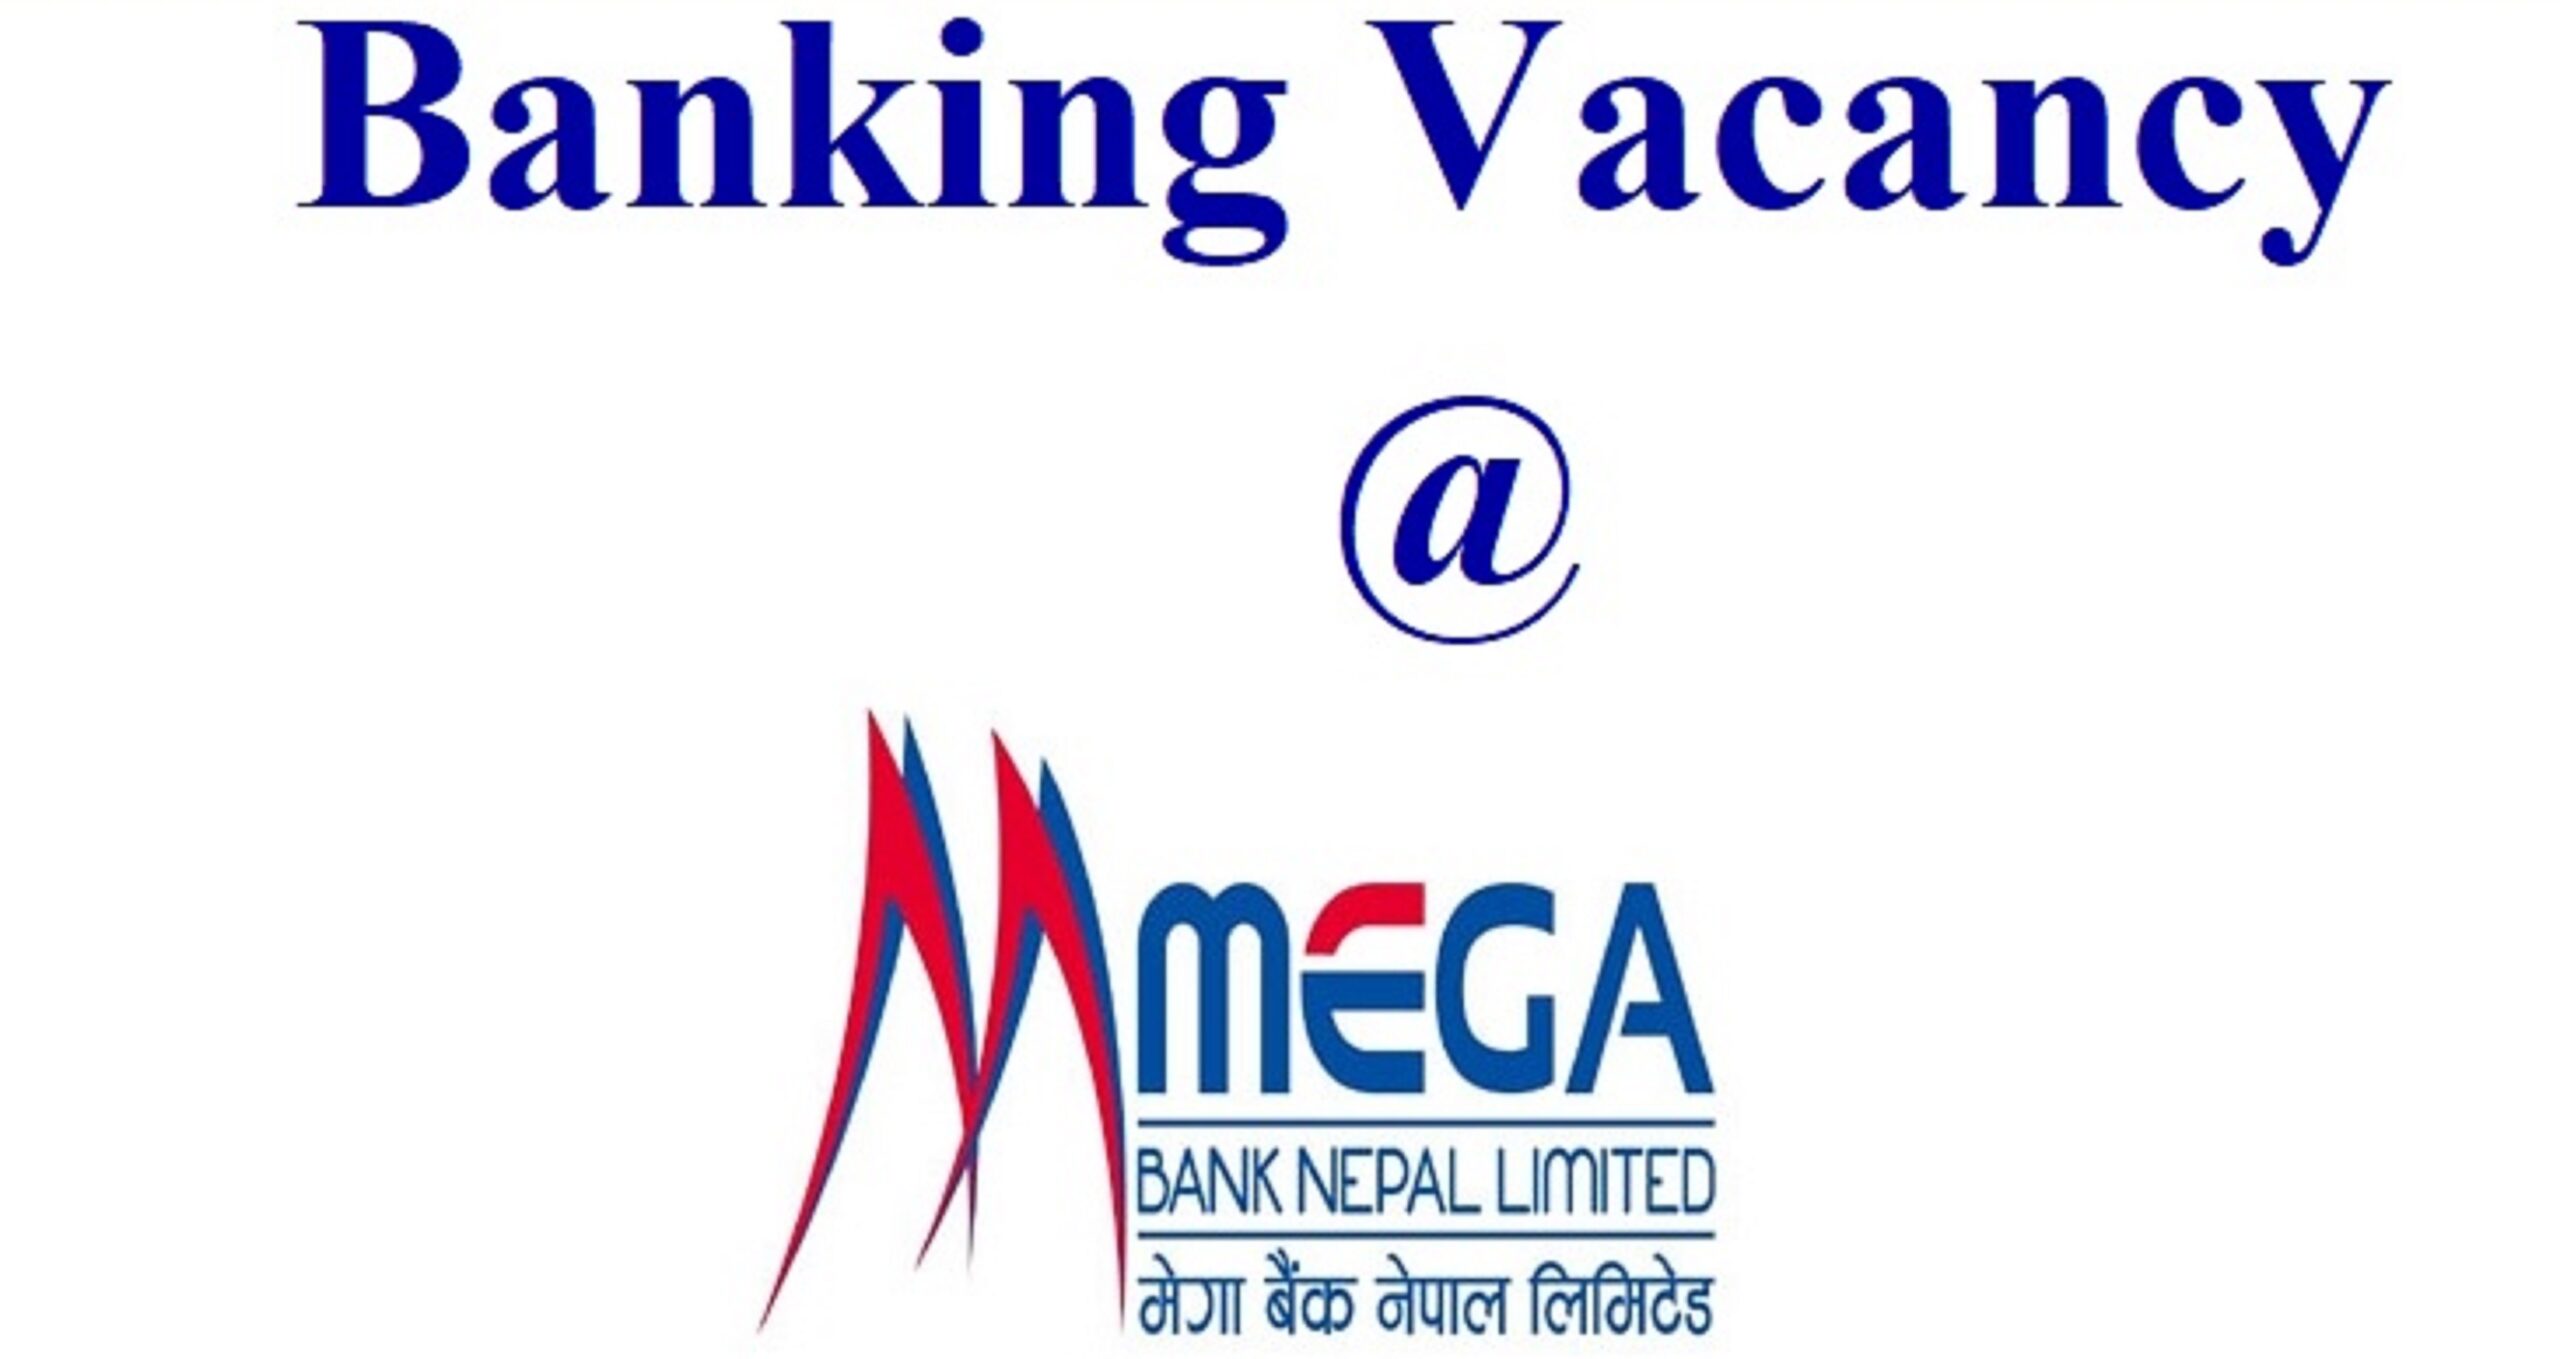 Vacancy Announcement from Mega Bank Nepal Limited